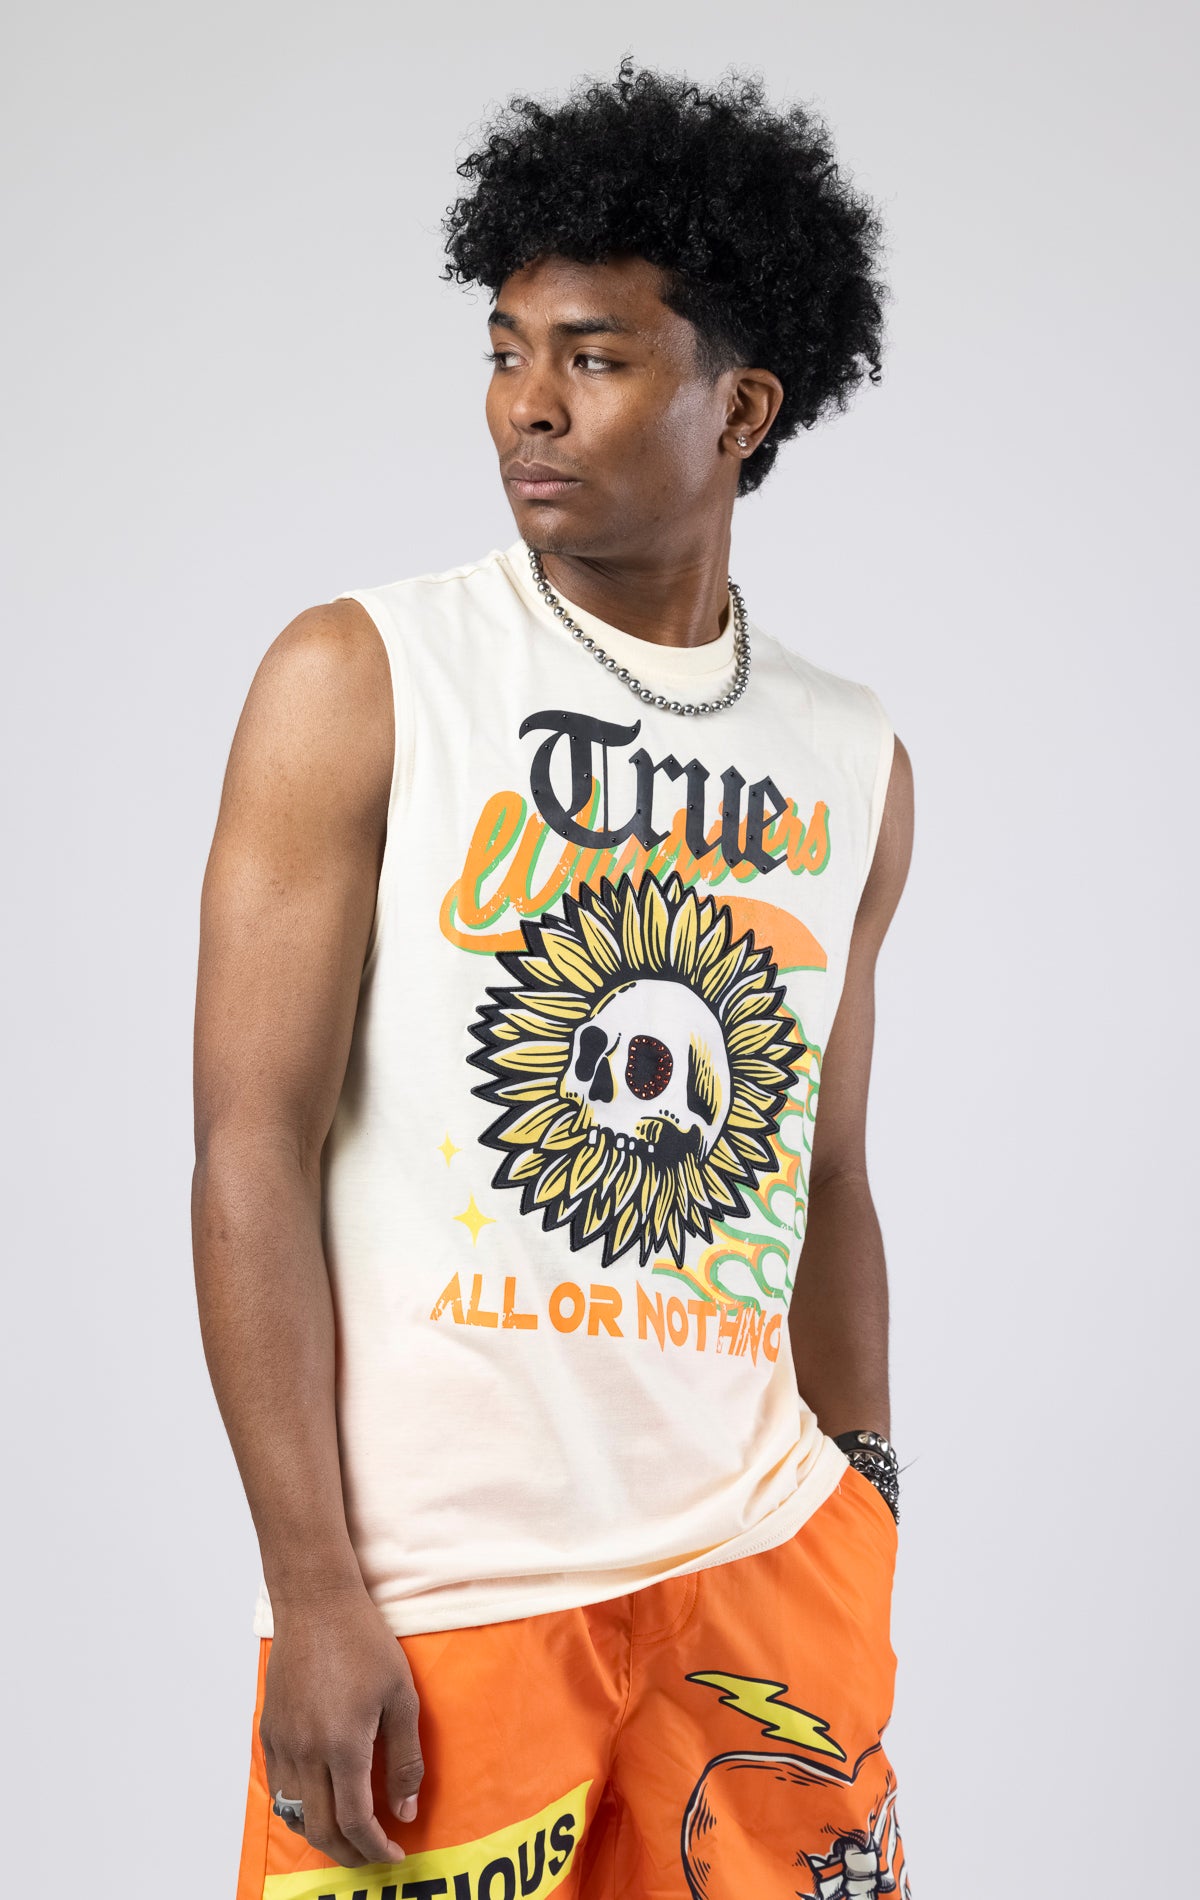 Creme Sleeveless crew neck tank top with a printed graphic.